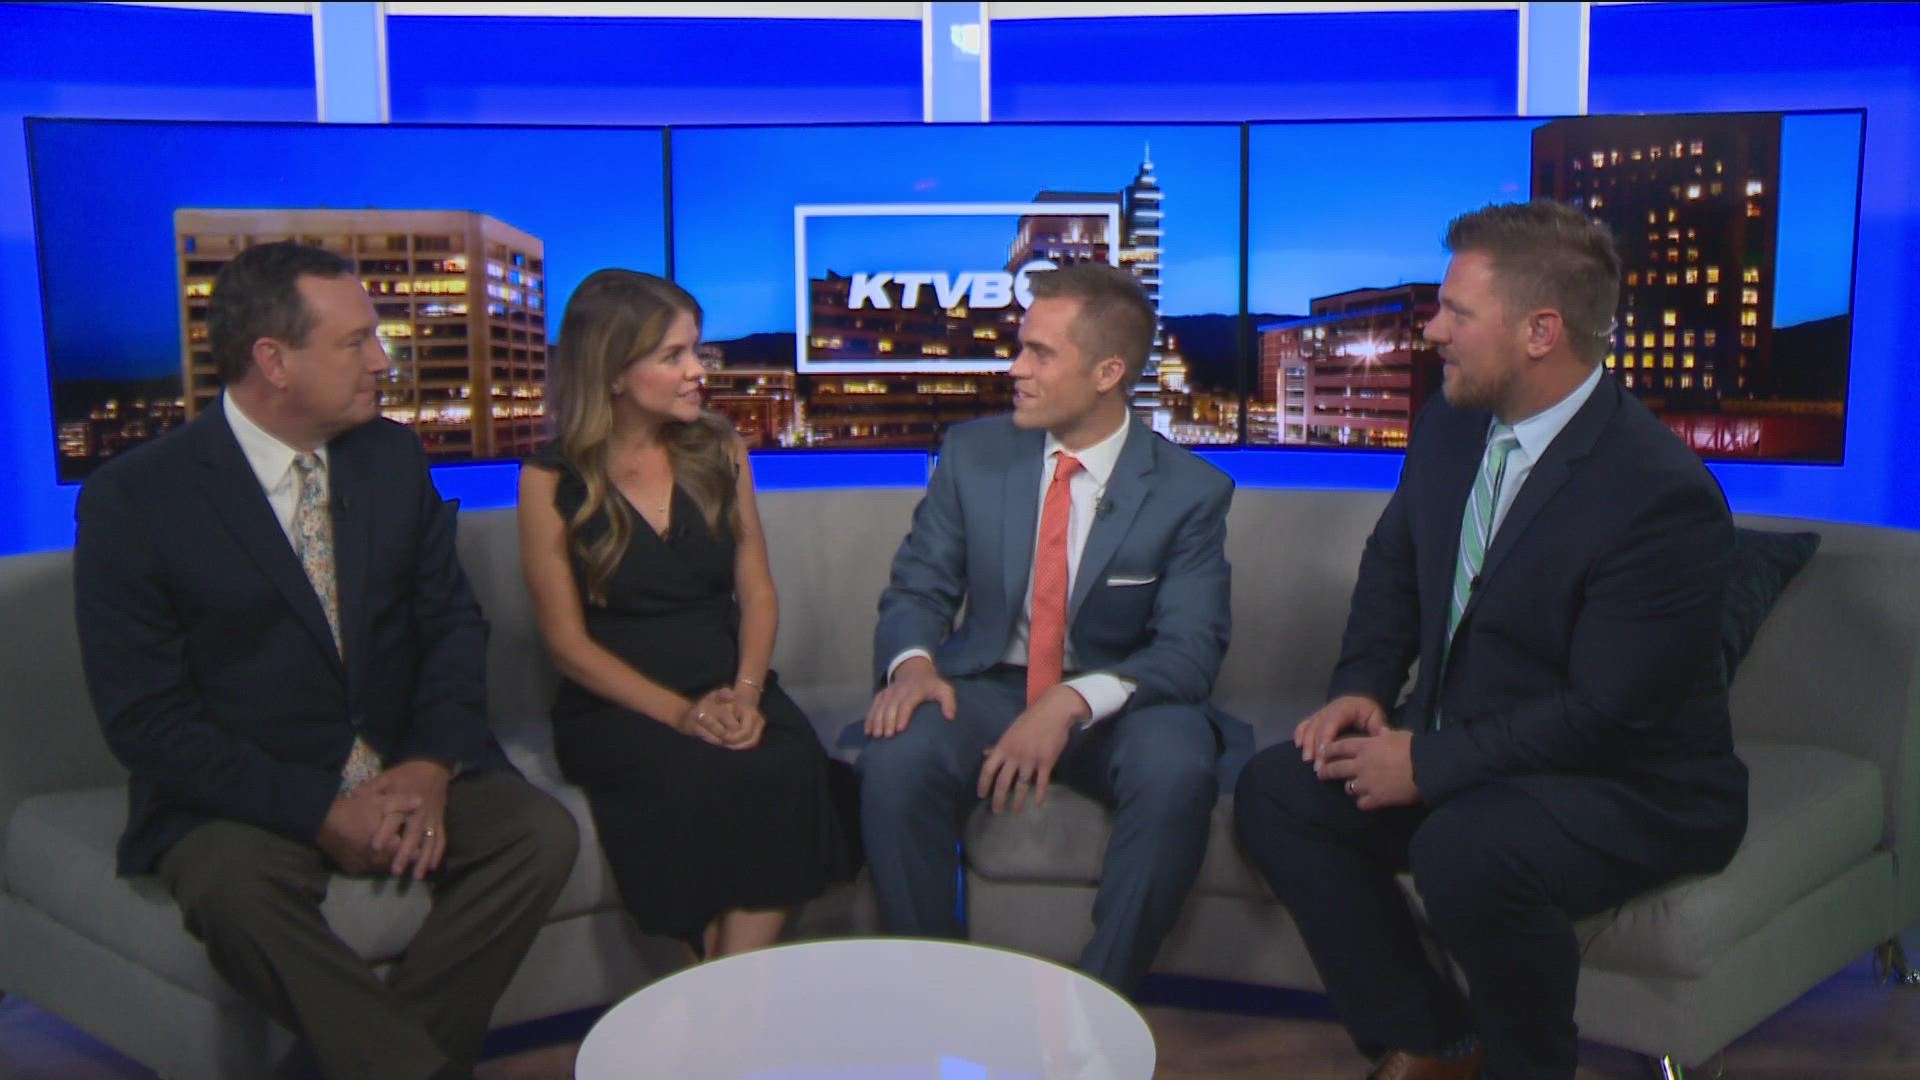 After eight years of working at KTVB, Will Hall reminisces about memories over the years with his fellow coworkers.